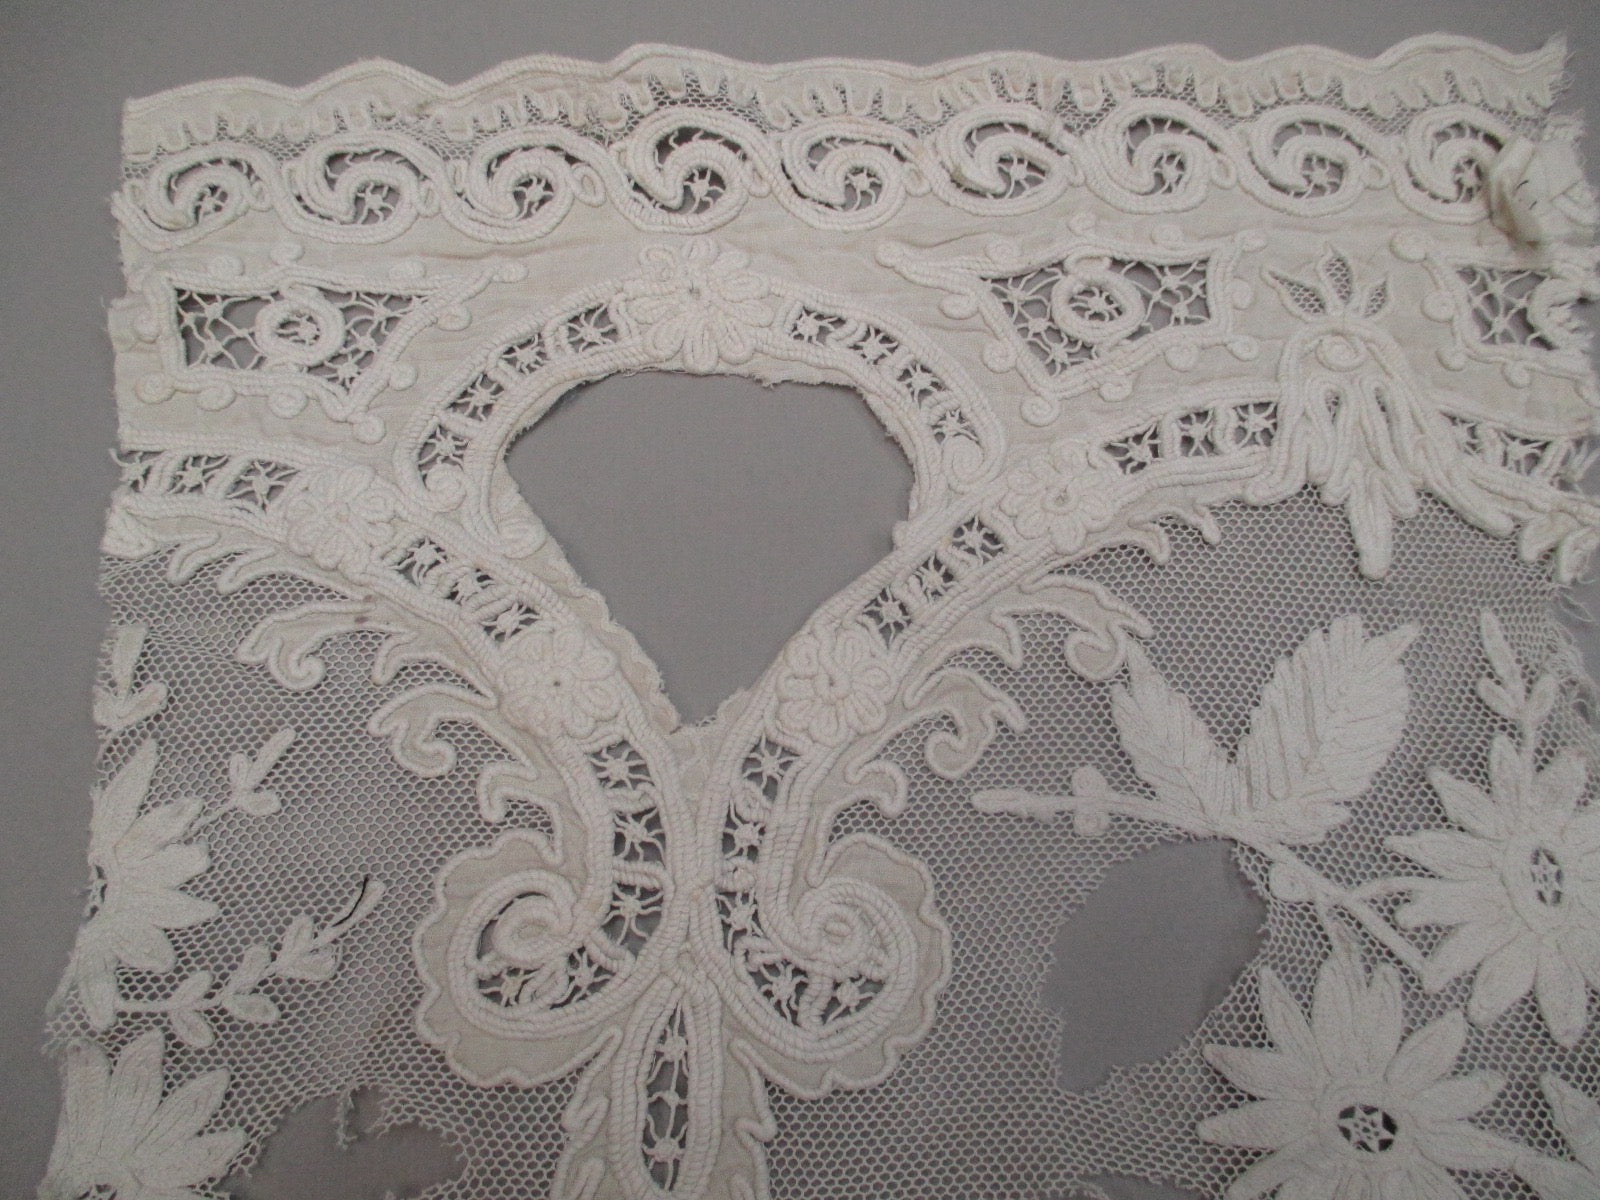 Antique Victorian Handmade embroidered lace remnant